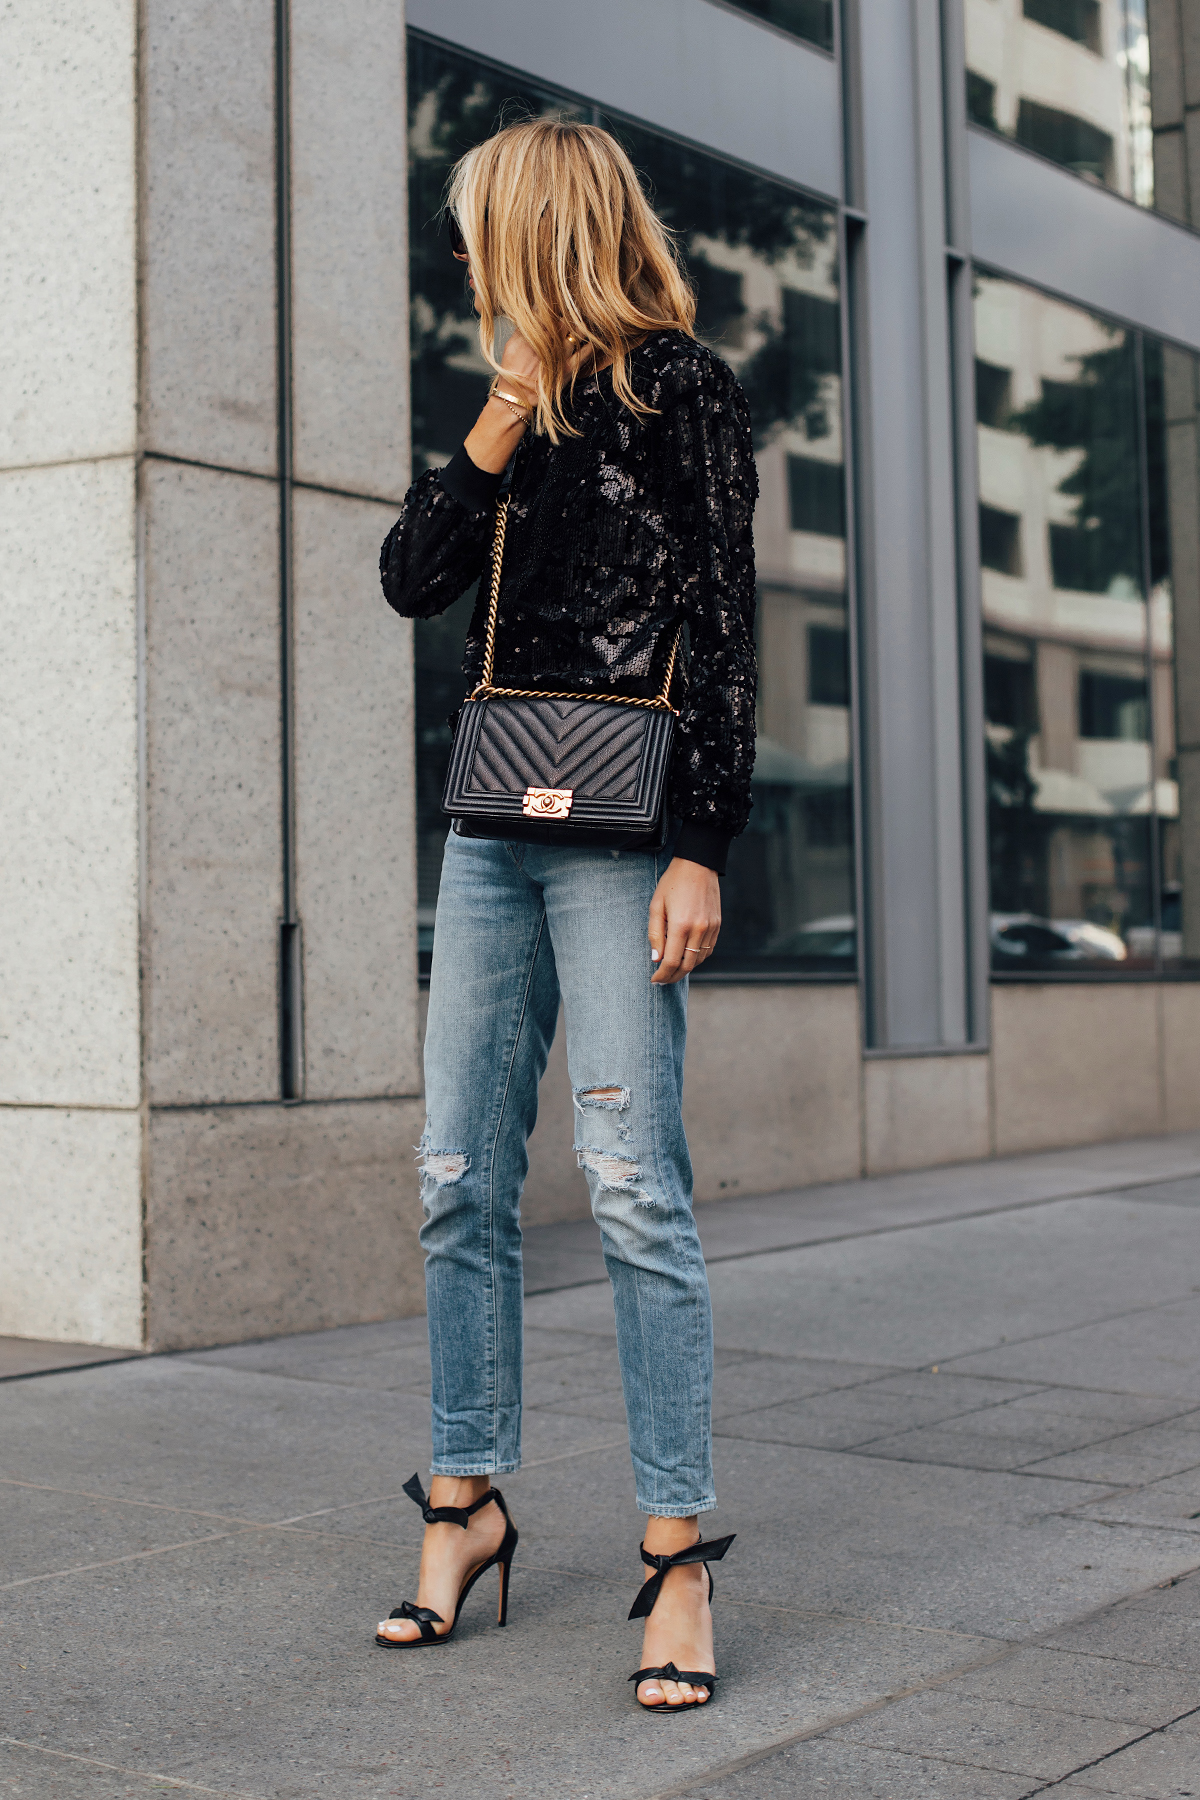 Blonde Woman Wearing Black Sequin Top Ripped Skinny Jeans Chanel Black Boy Bag Black Ankle Tie Heeled Sandals Fashion Jackson San Diego Fashion Blogger Street Style NYE Outfit